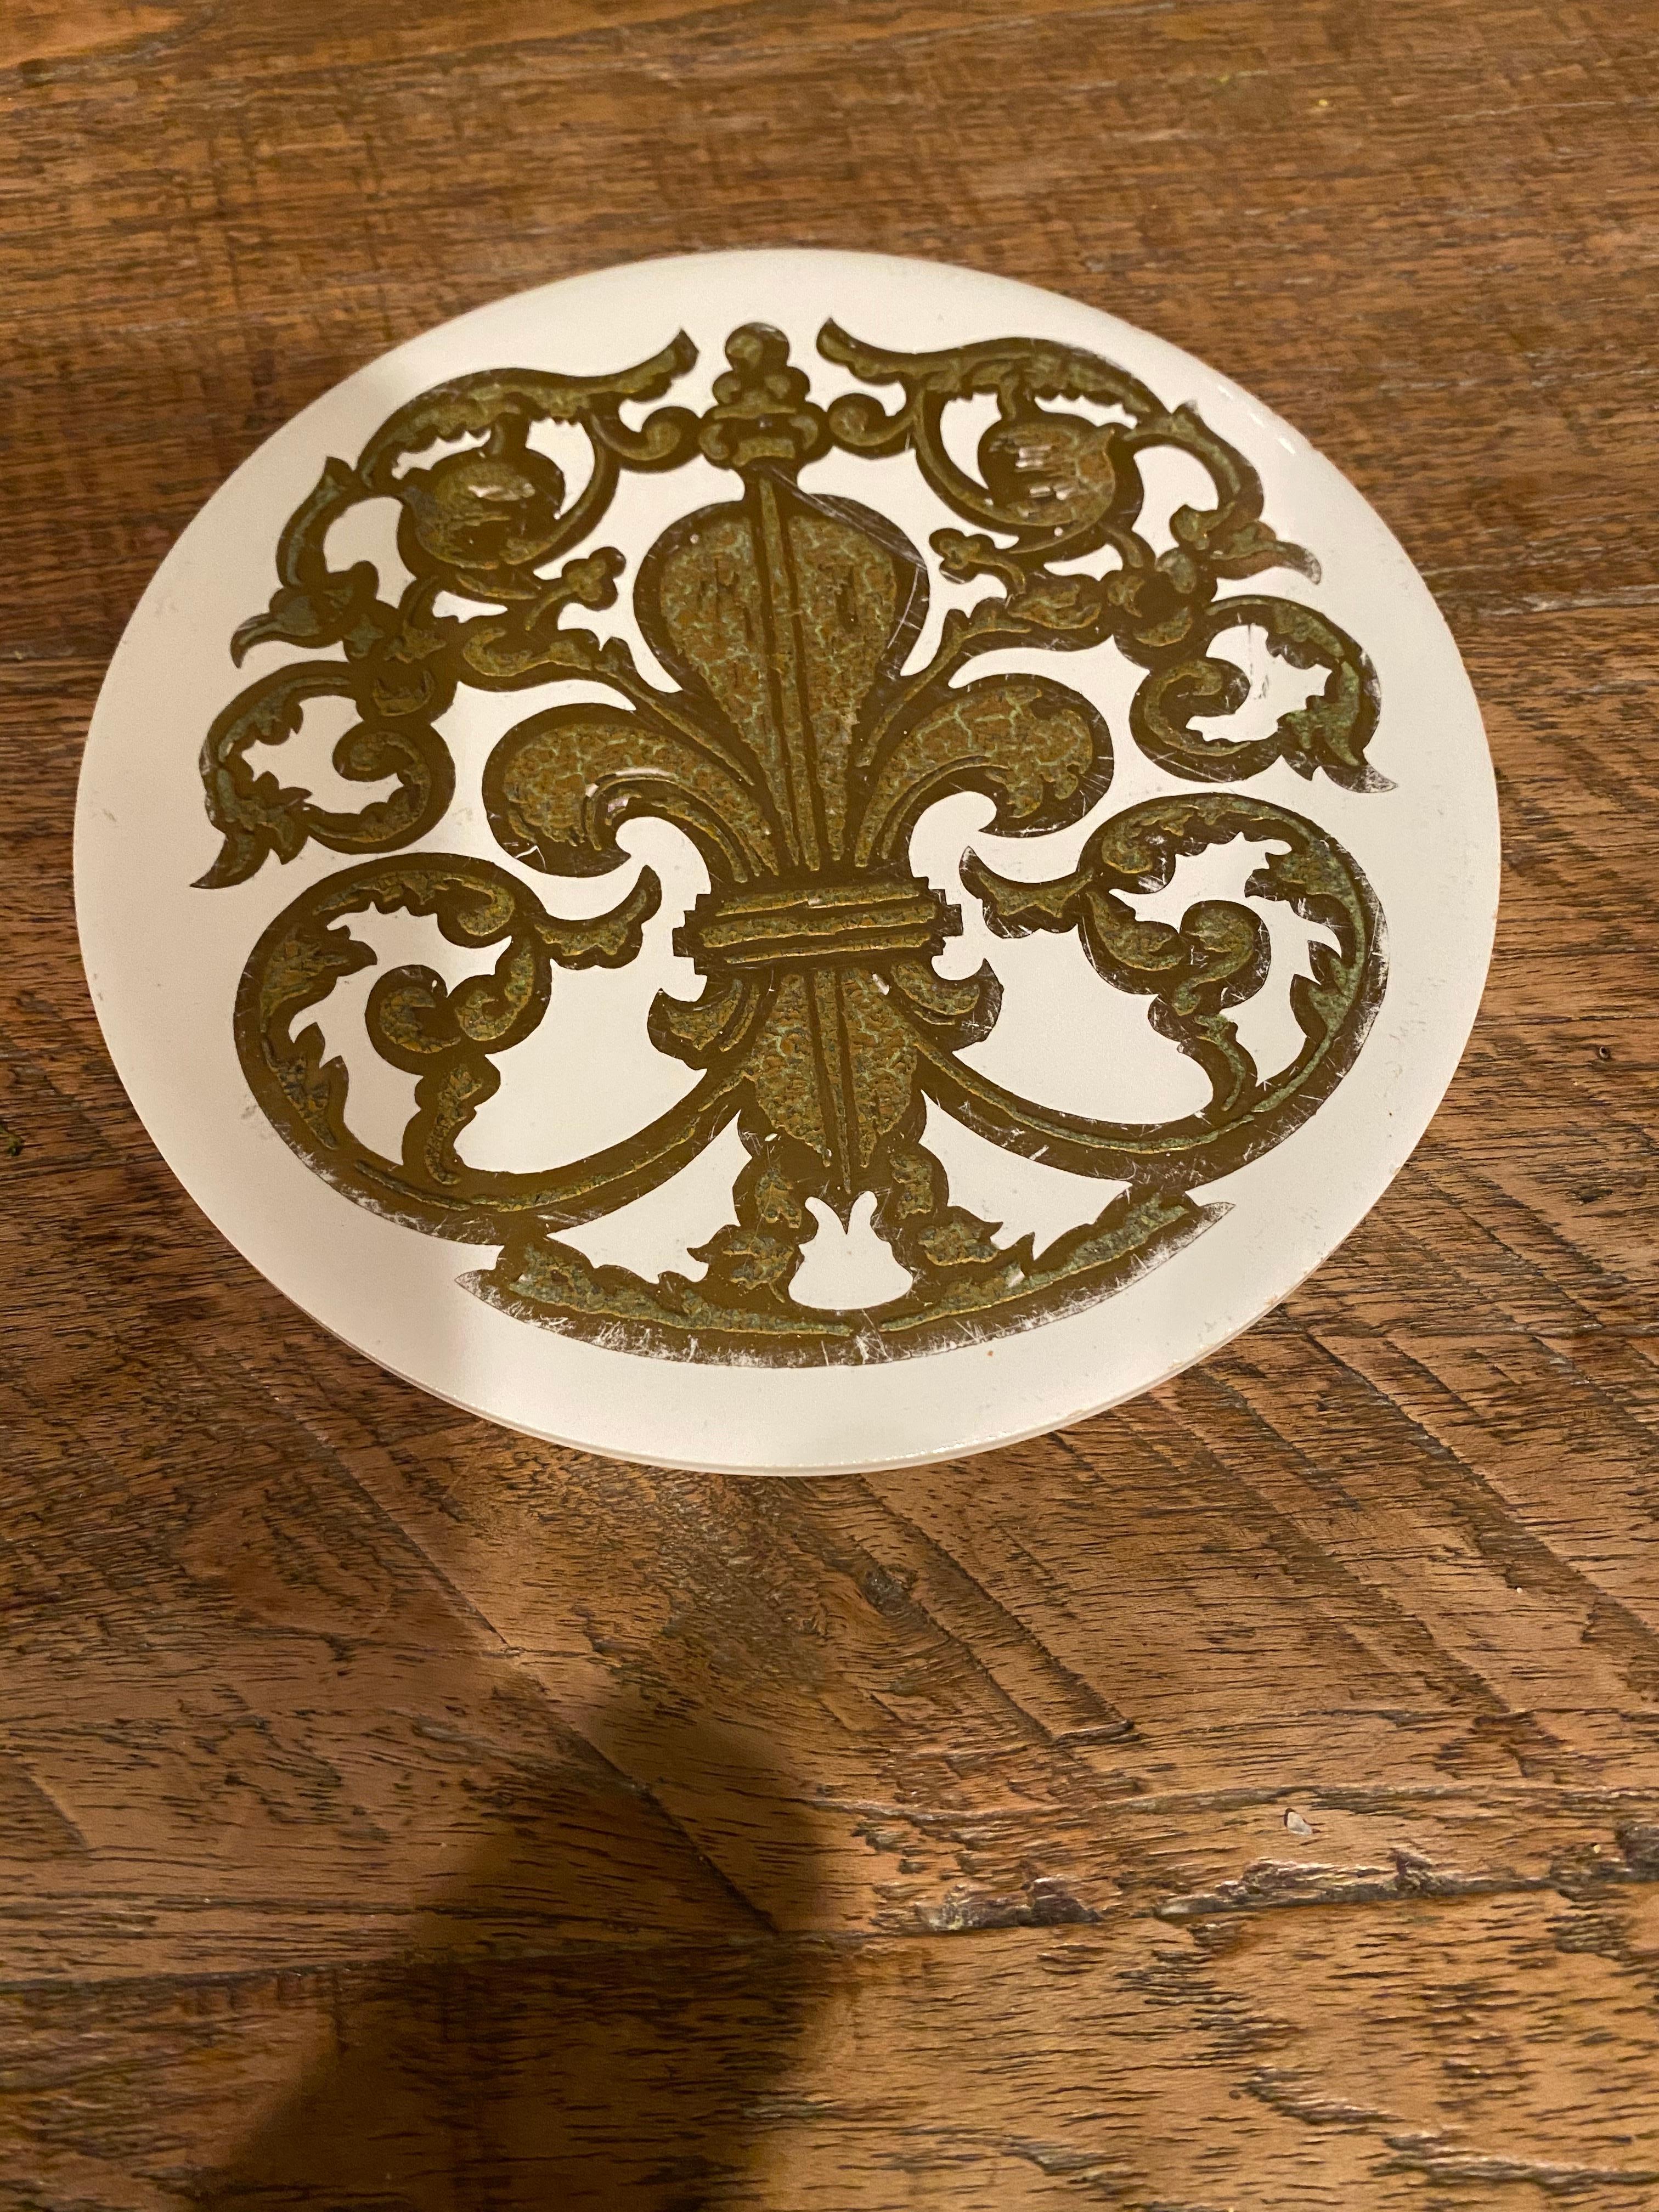 A beautiful detail for any kitchen. Great for setting hot pots and pans and a great accent for the countertop or dining table while not in use. This white ironstone has a white ceramic glaze on the top with fleur-de-lis design.